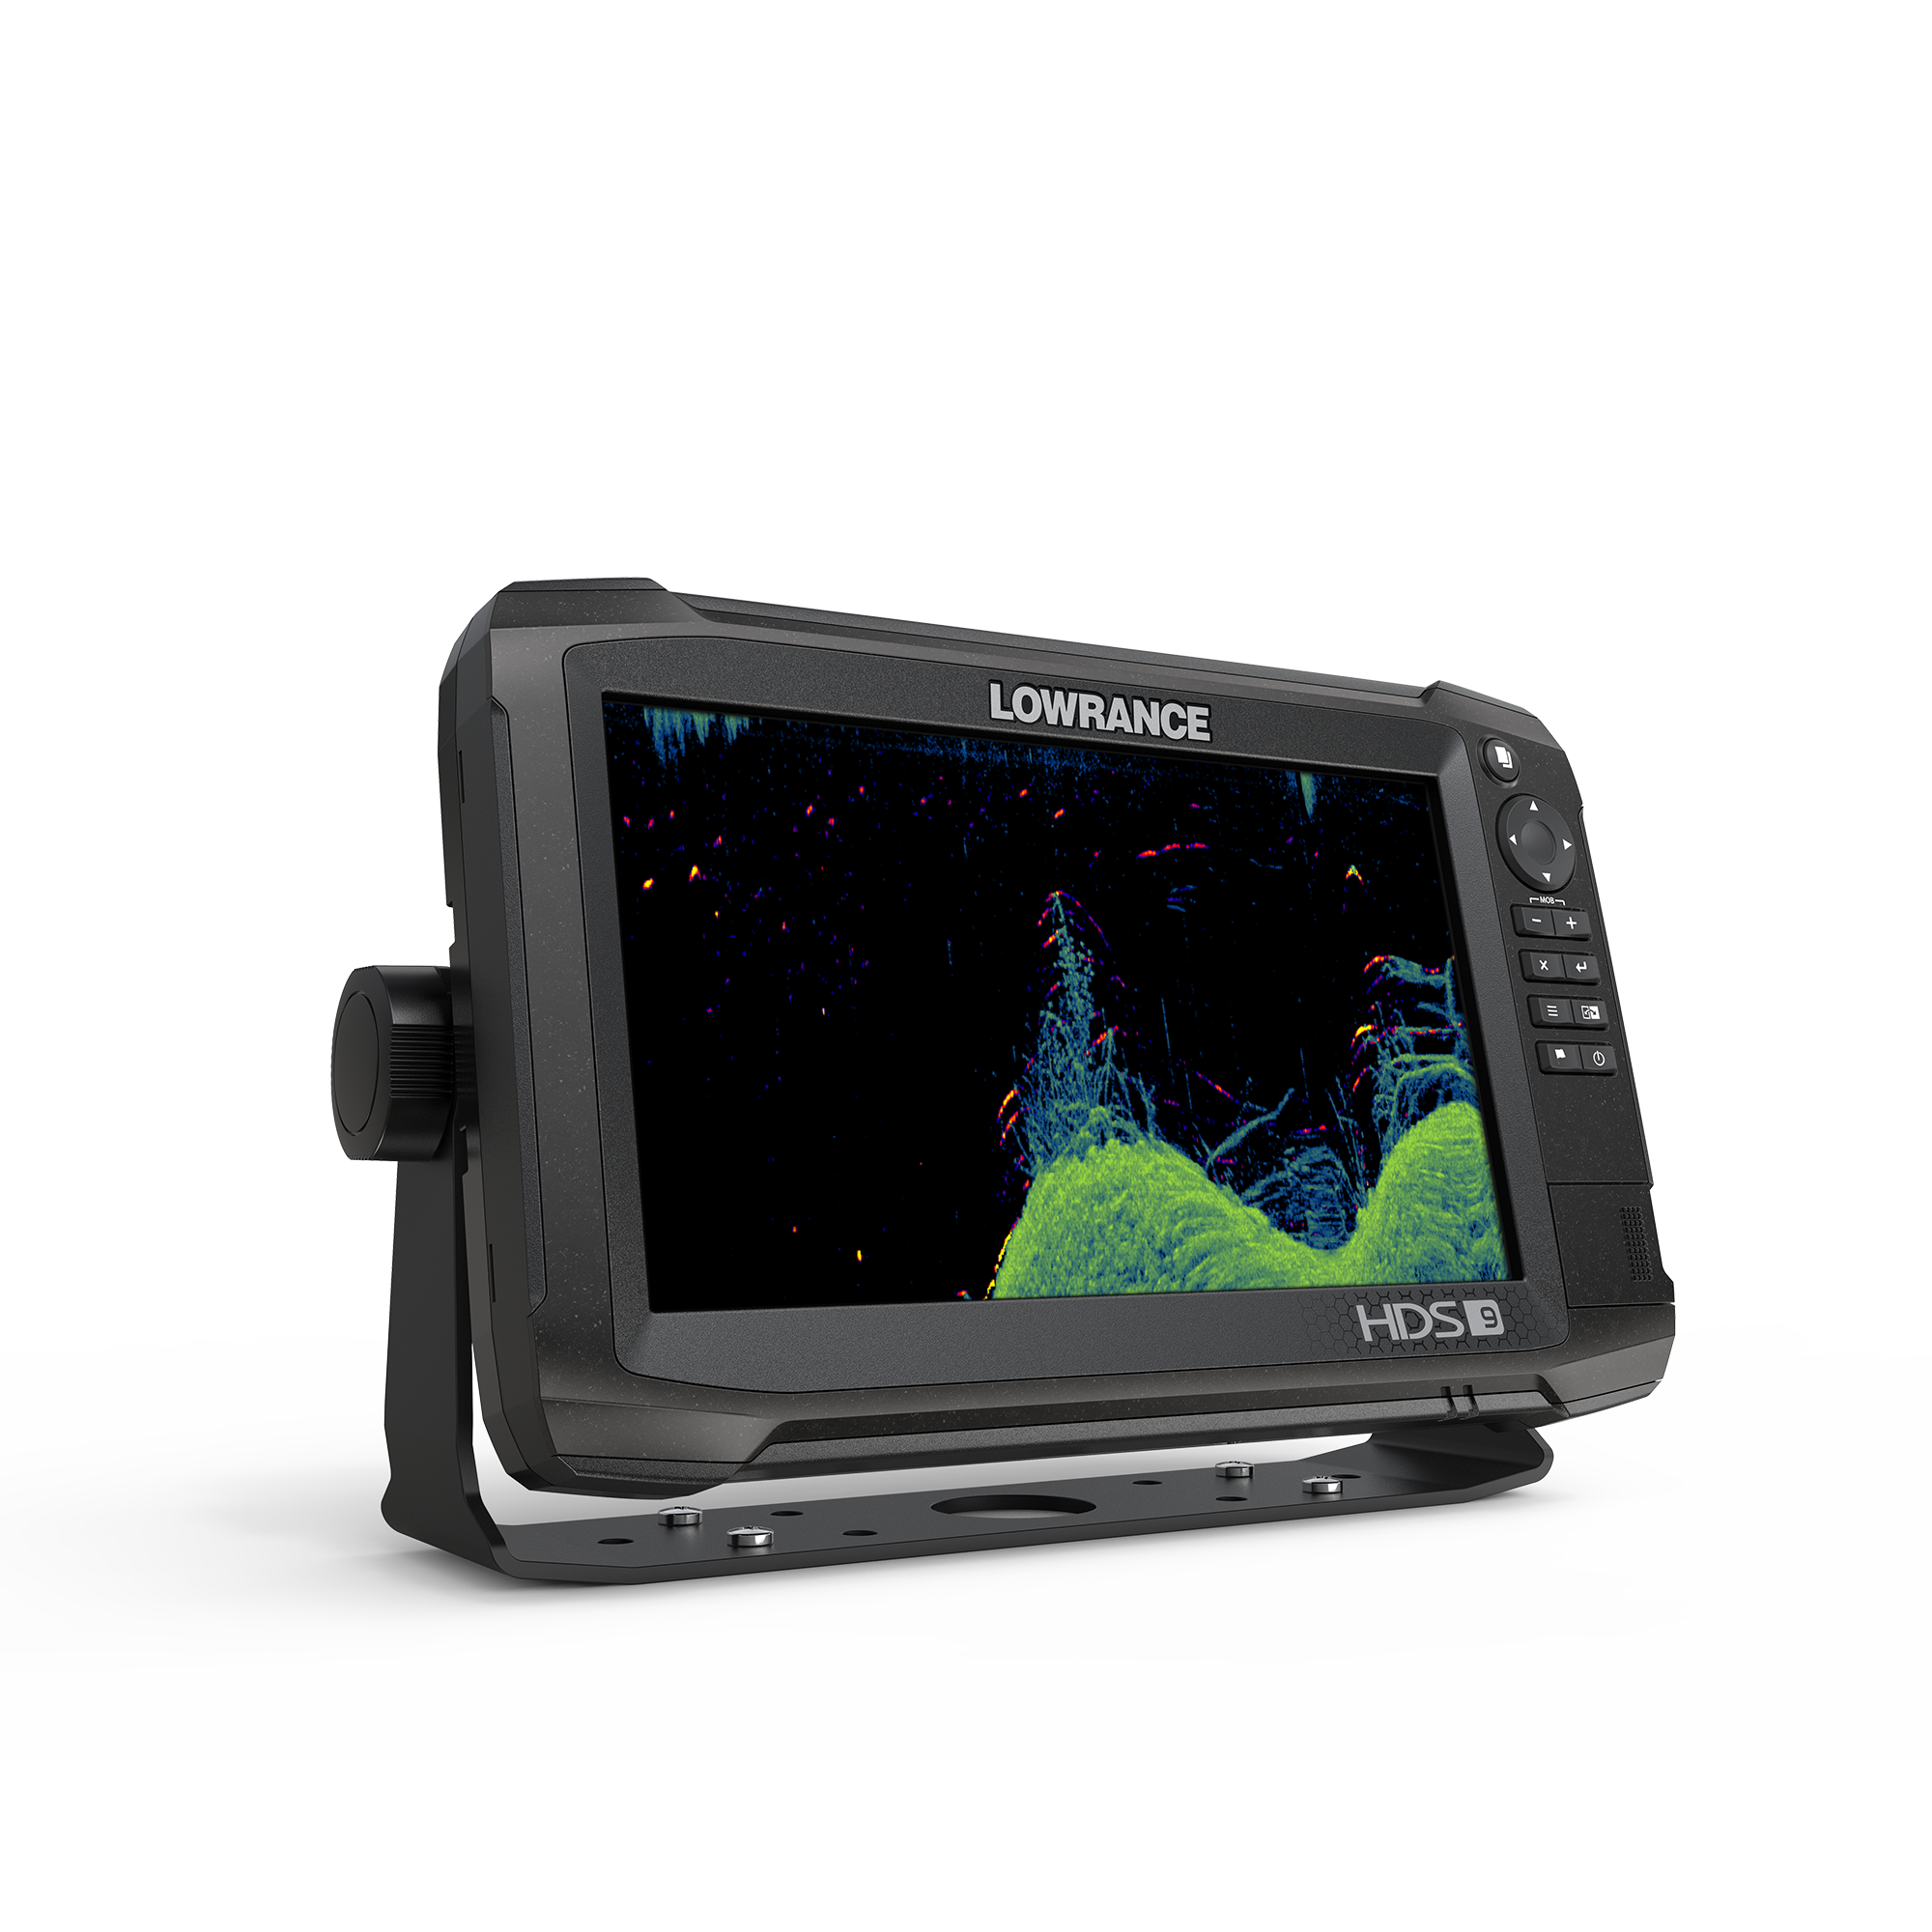 Lowrance HDS Carbon 9 (000-15891-001) - GPS Central